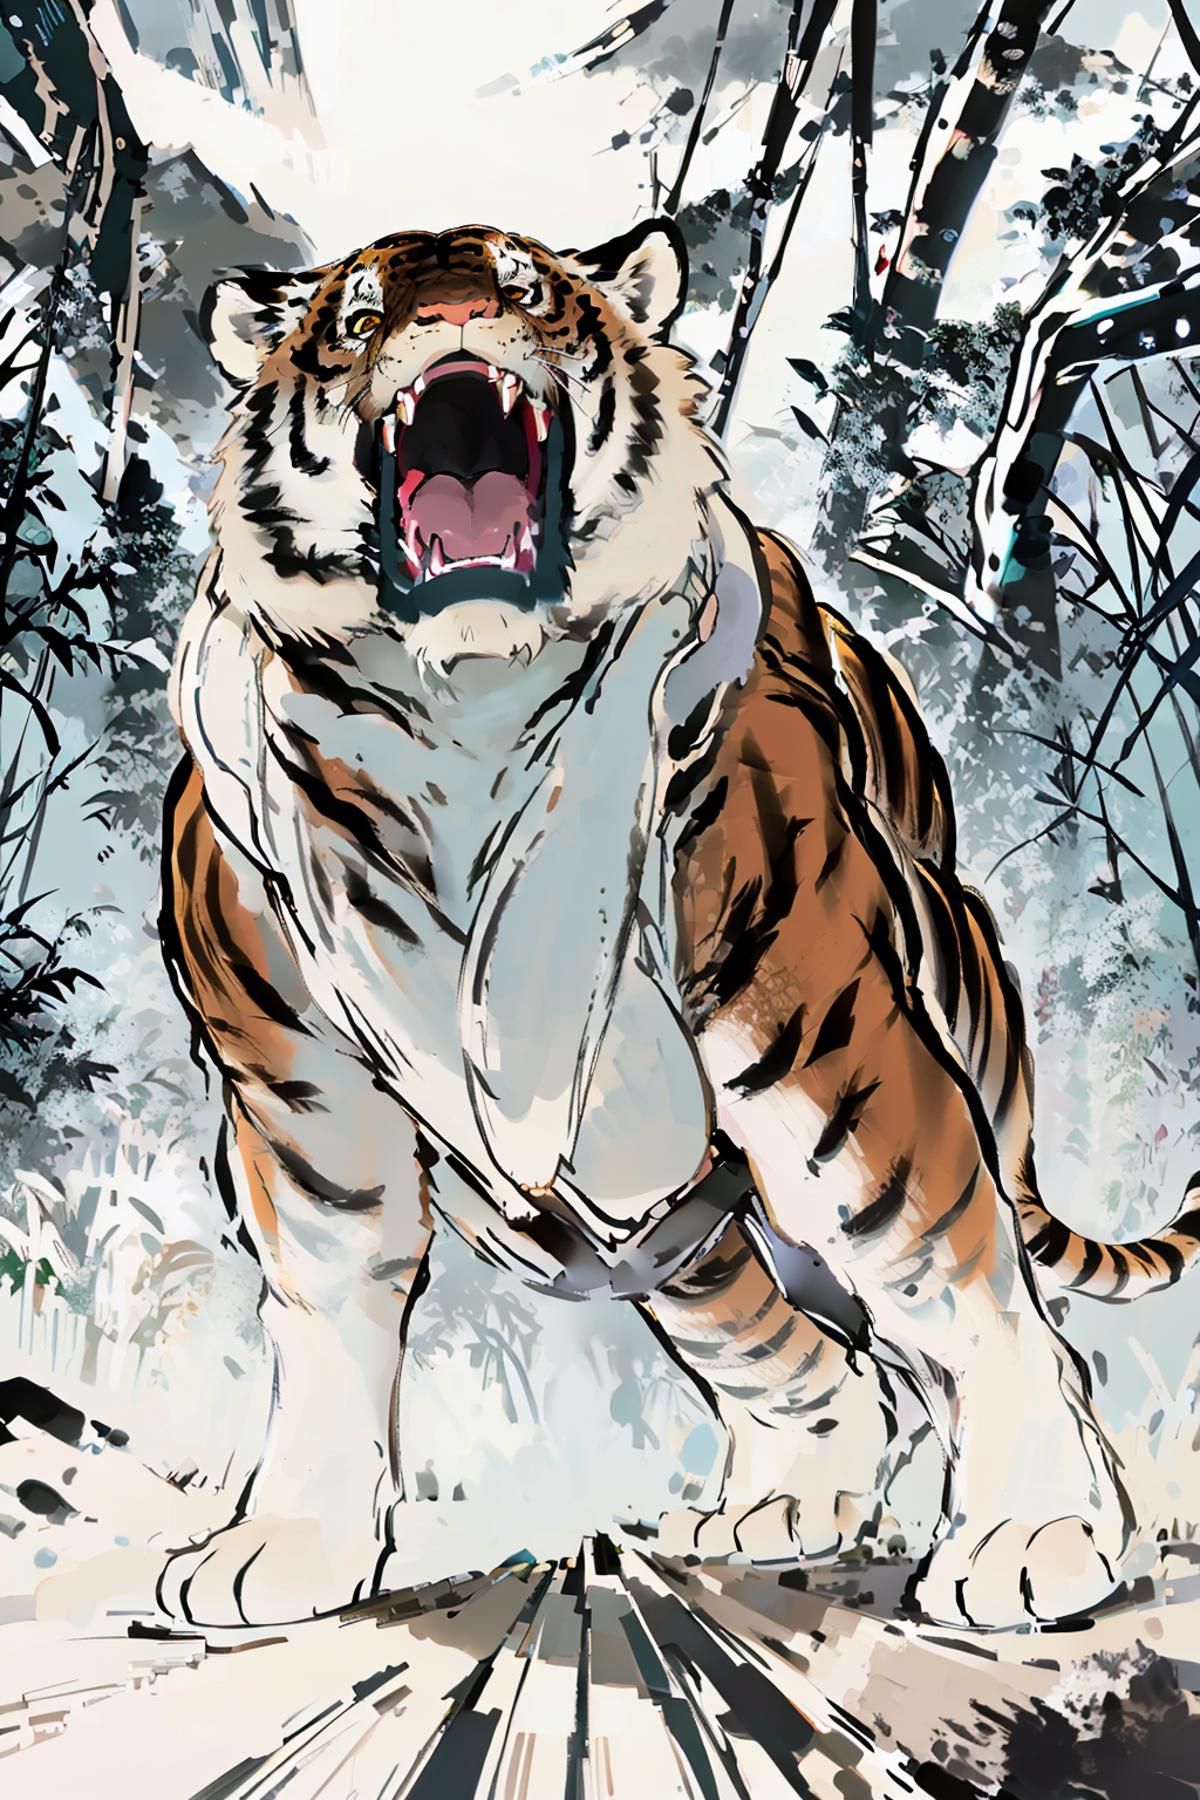 Large Tiger Roaring in a Forest with Snow on the Ground